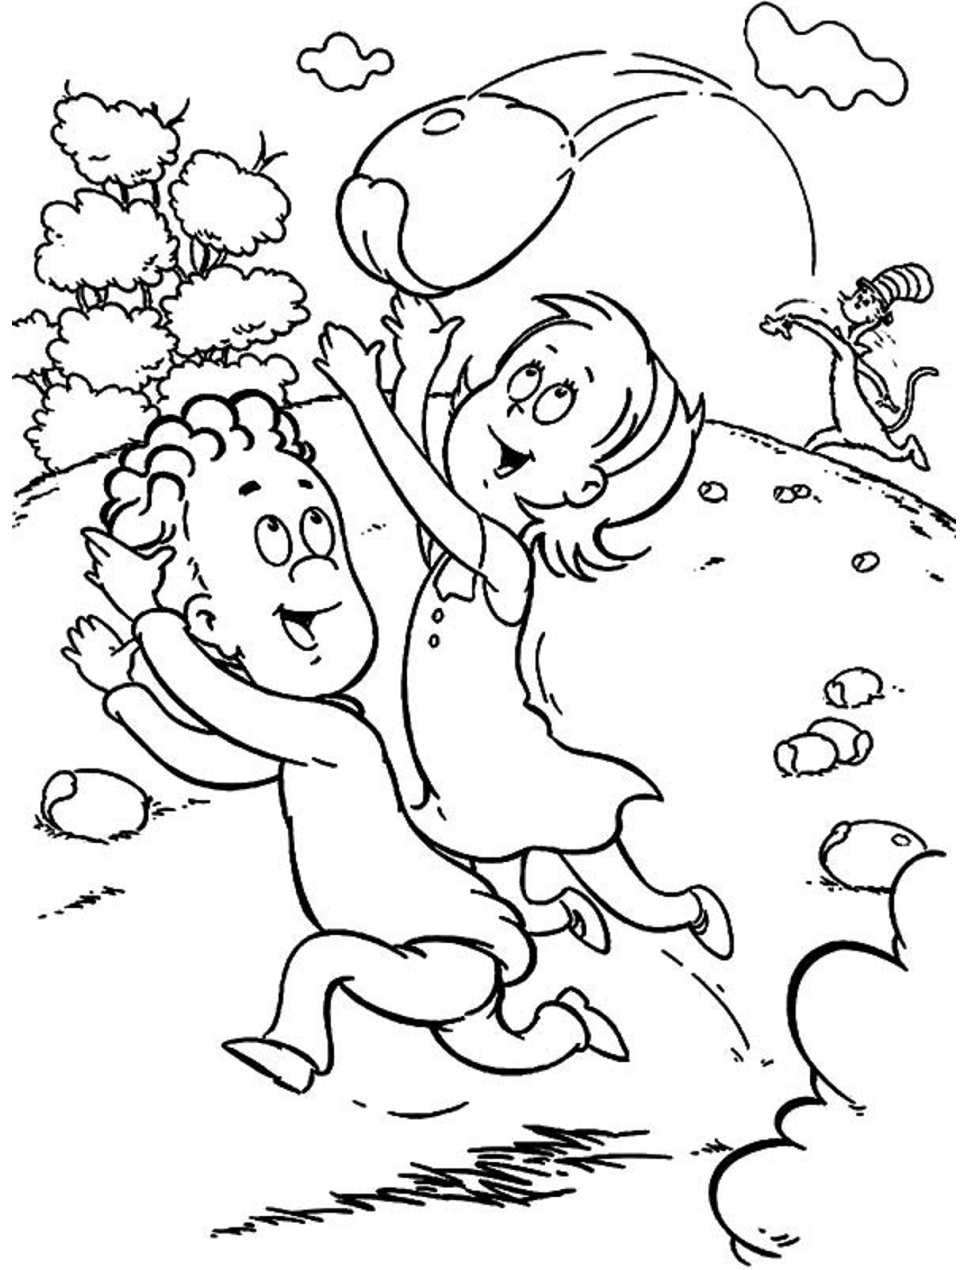 Cat Playing With Nick And Sally Coloring Page - Free Printable Coloring ...